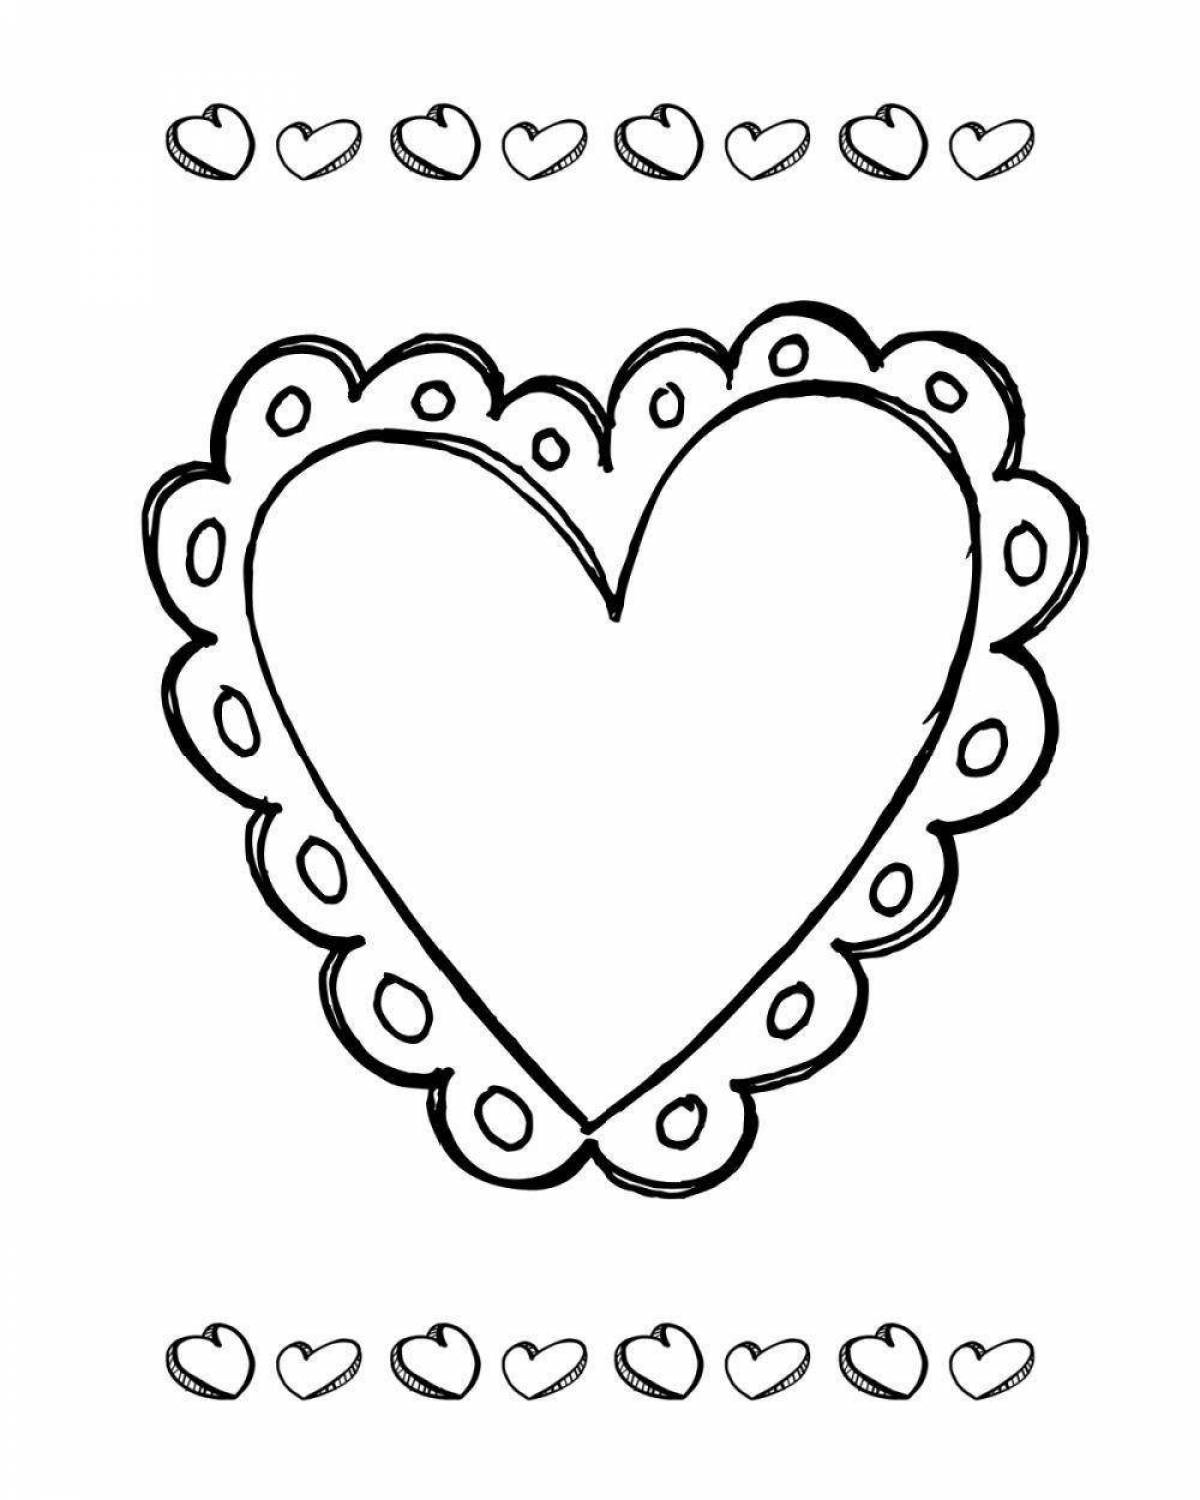 Colorful heart coloring book